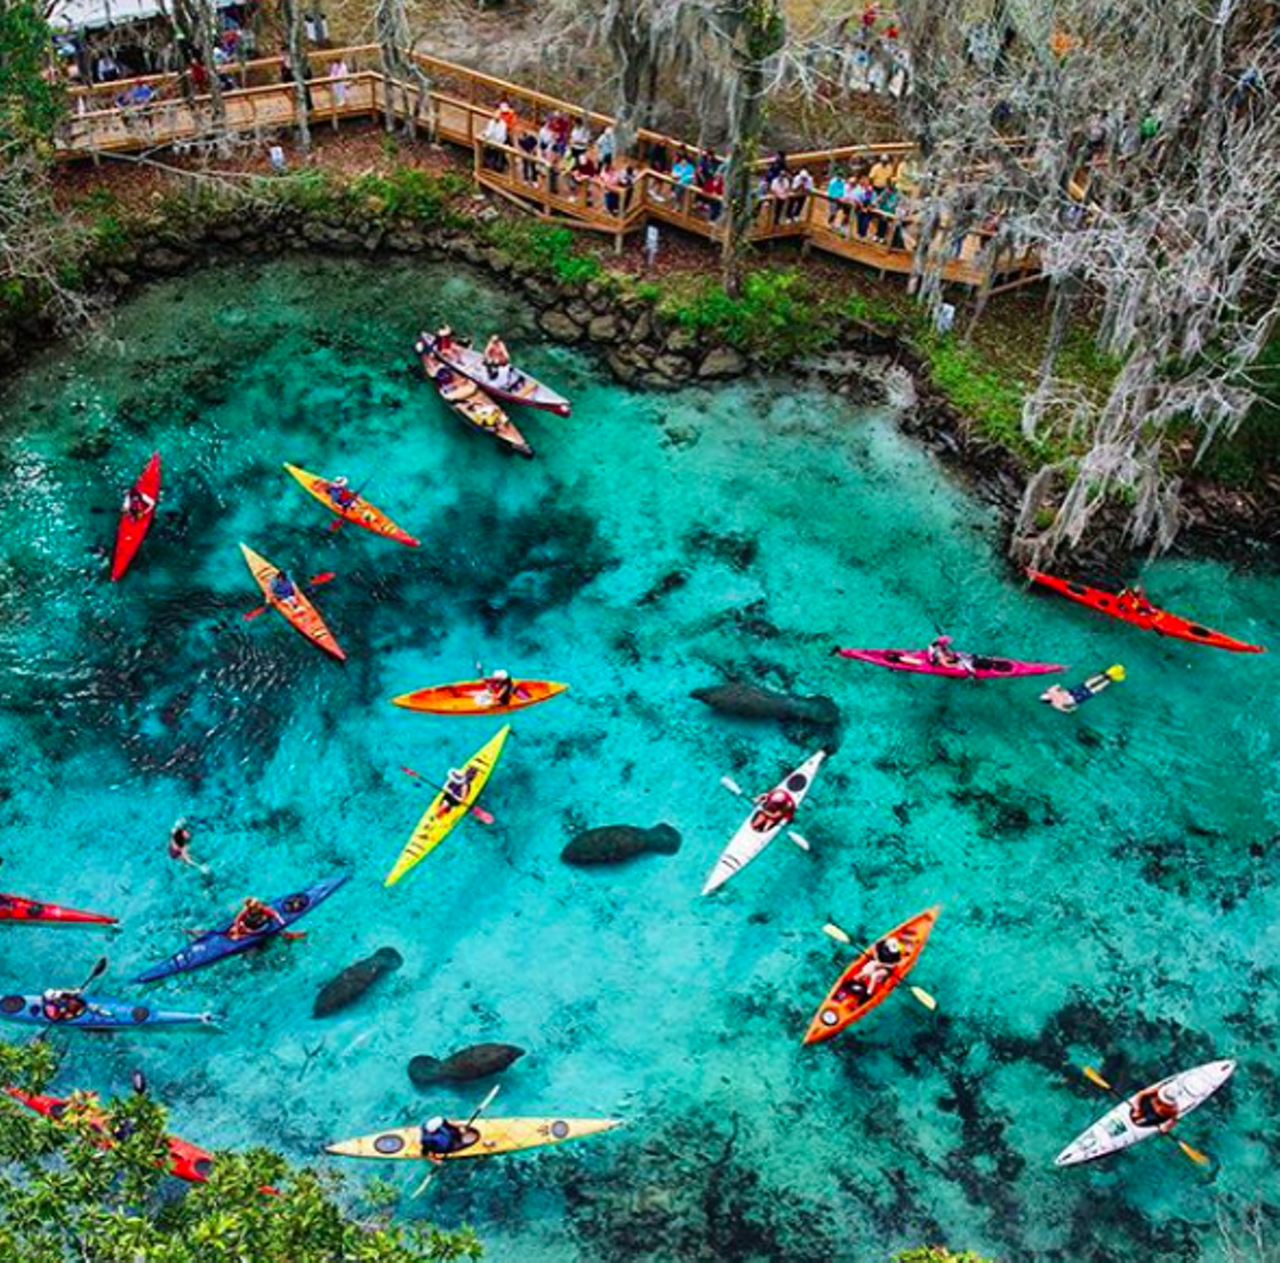 Three Sisters Spring at Crystal River
915 N Suncoast Blvd., Crystal River | 352-586-1170
A critical warm-water refuge for manatees, Three Sisters Spring offers boardwalk viewings of the manatees in their natural habitat. Scenic and boat tours are available from third-party providers.
Photo via natgeotravel/Instagram